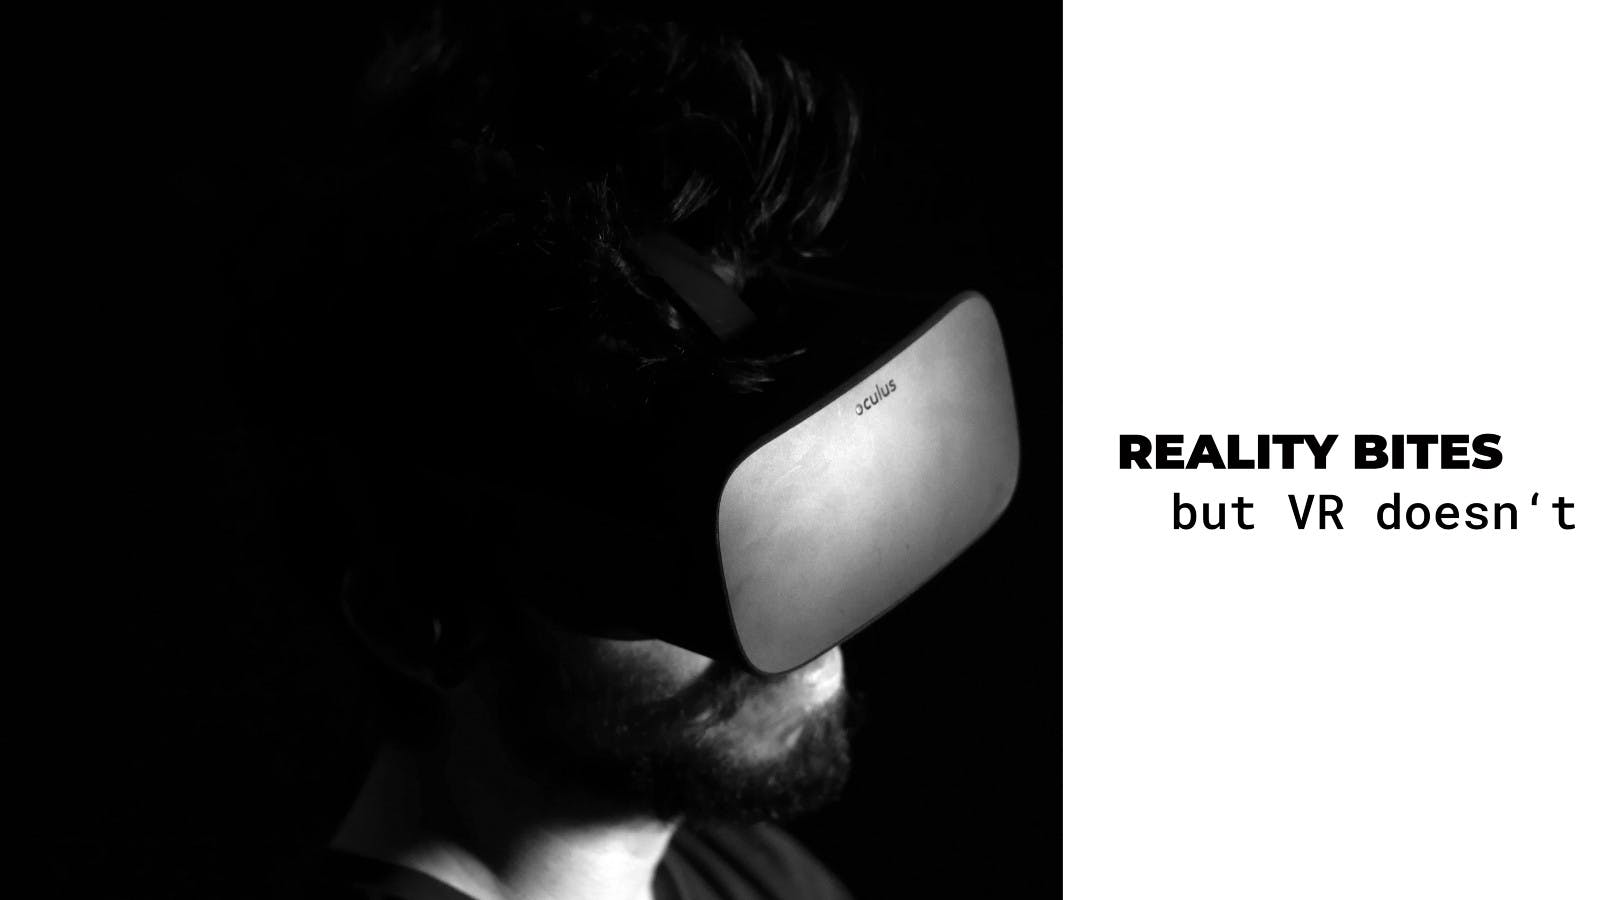 /reality-bites-but-vr-doesnt-be441a74ab15 feature image